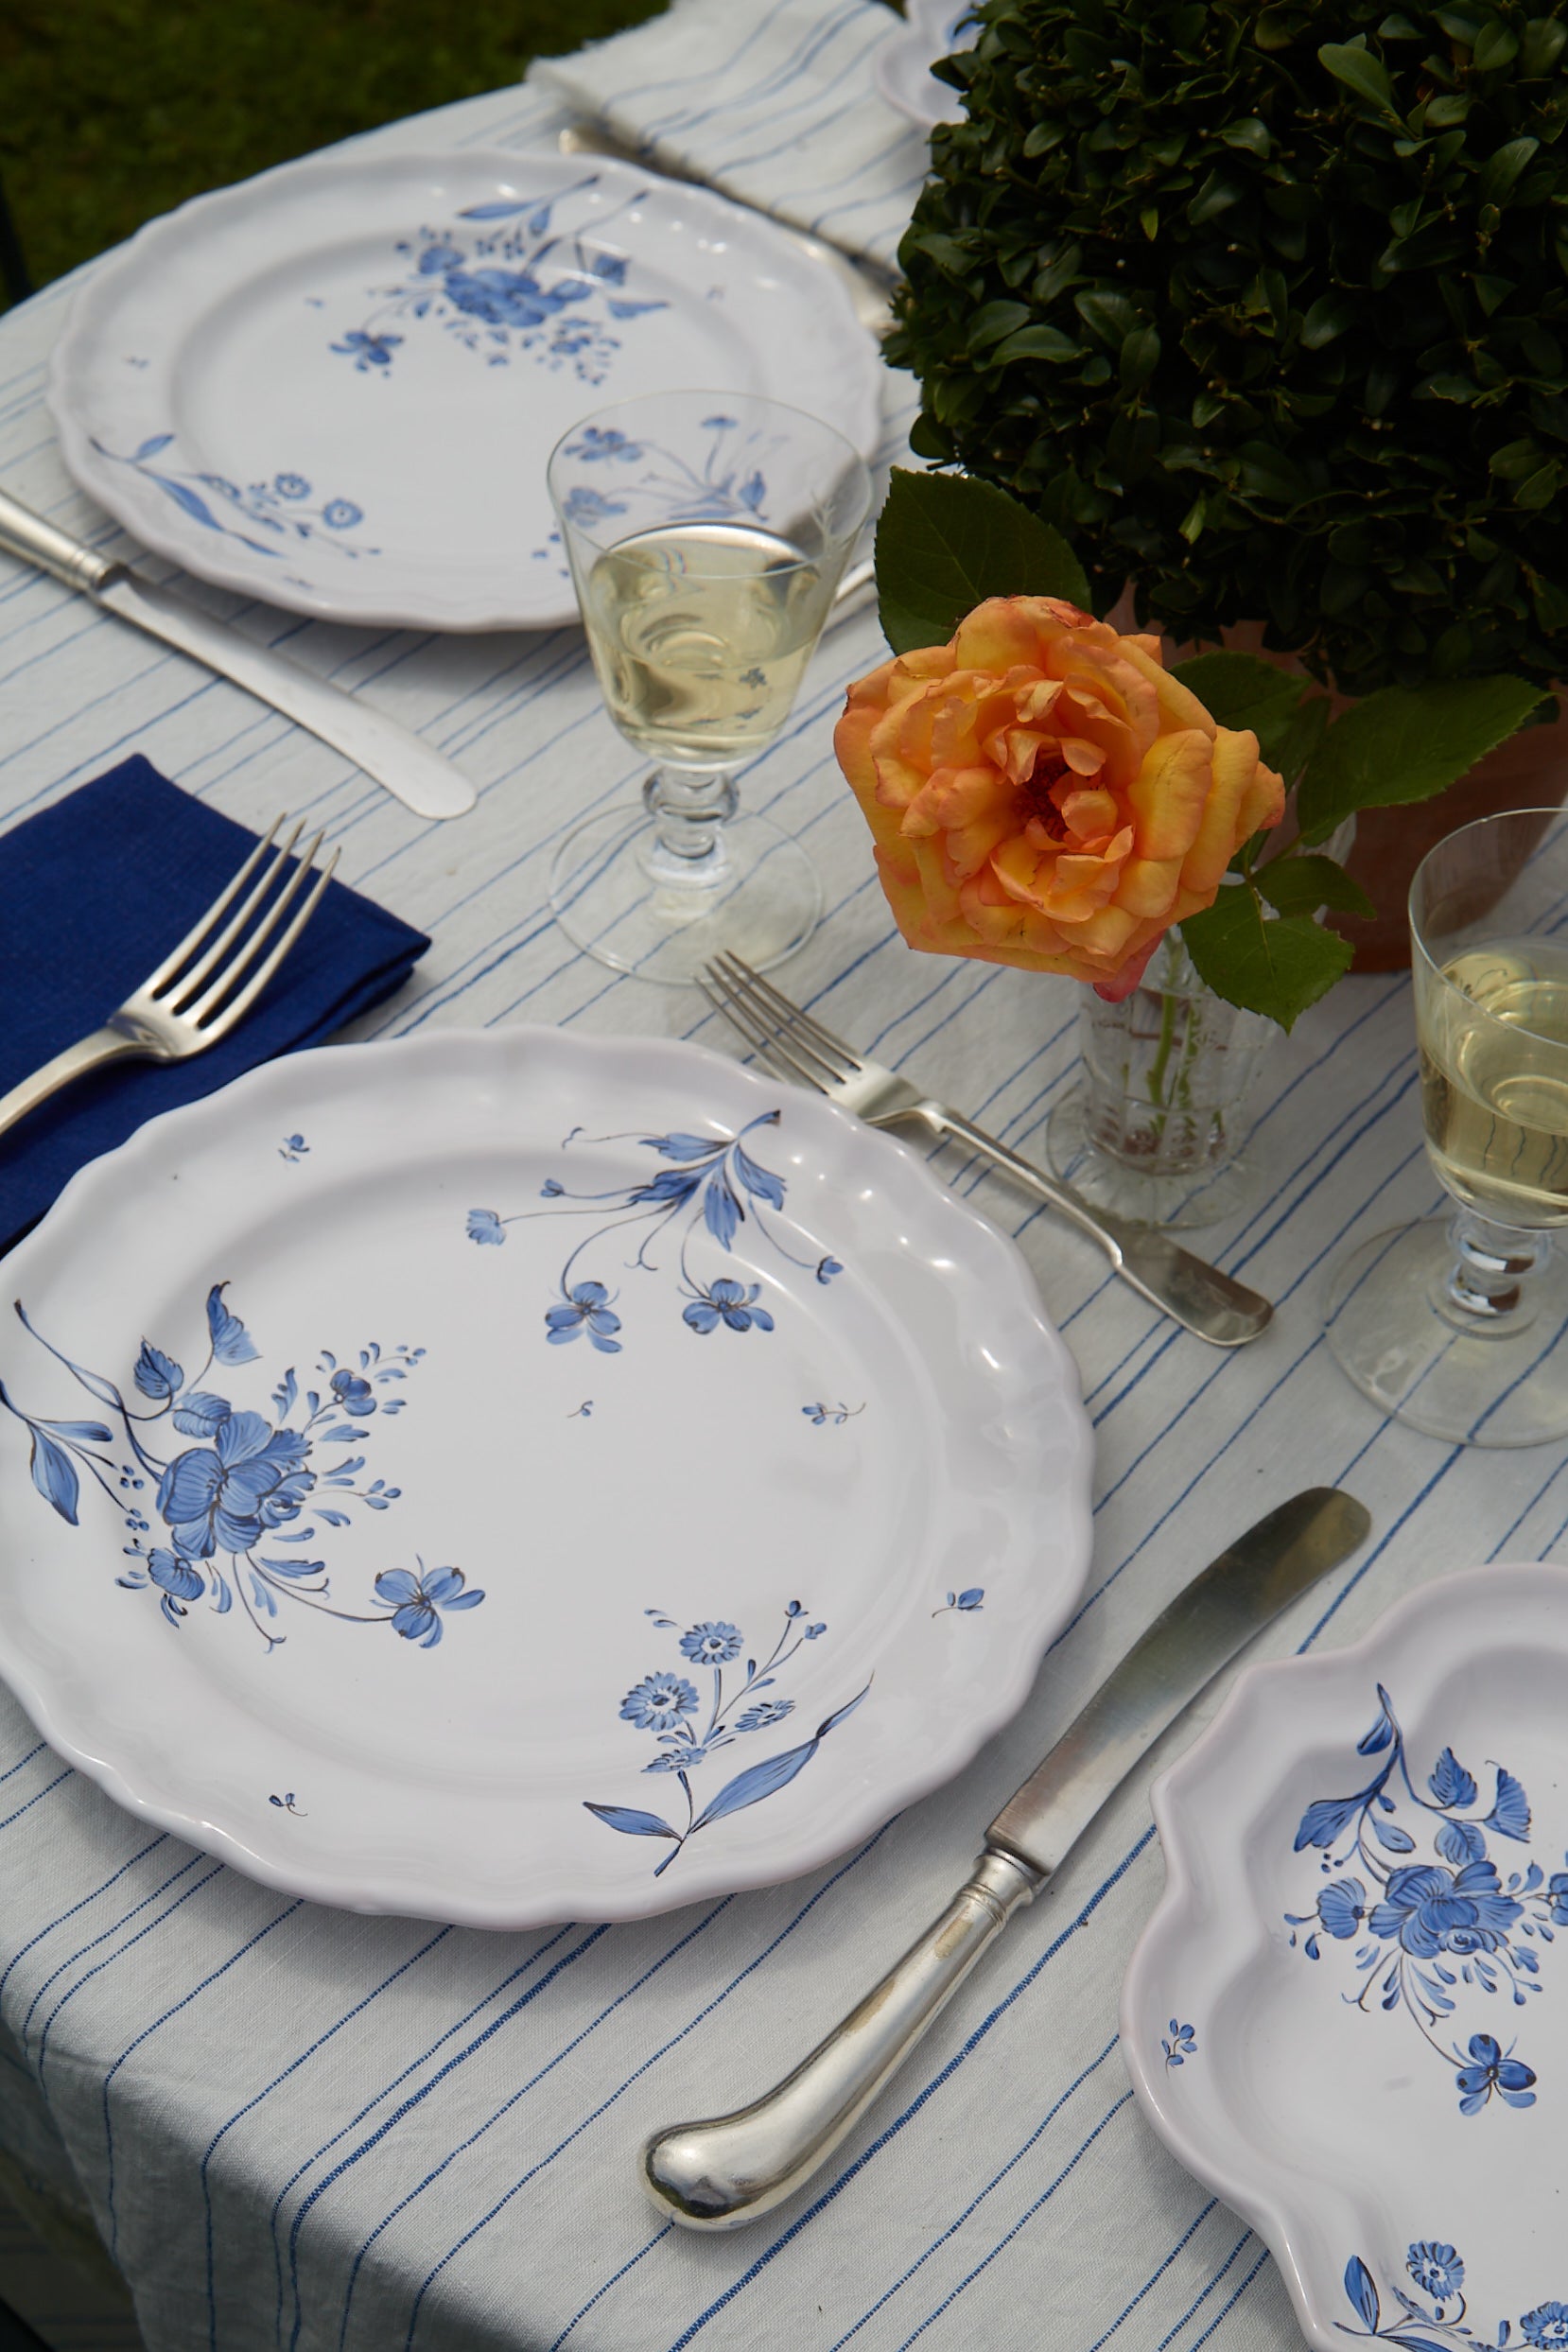 styled table setting with Camaïeu Dinner Plate, Azur